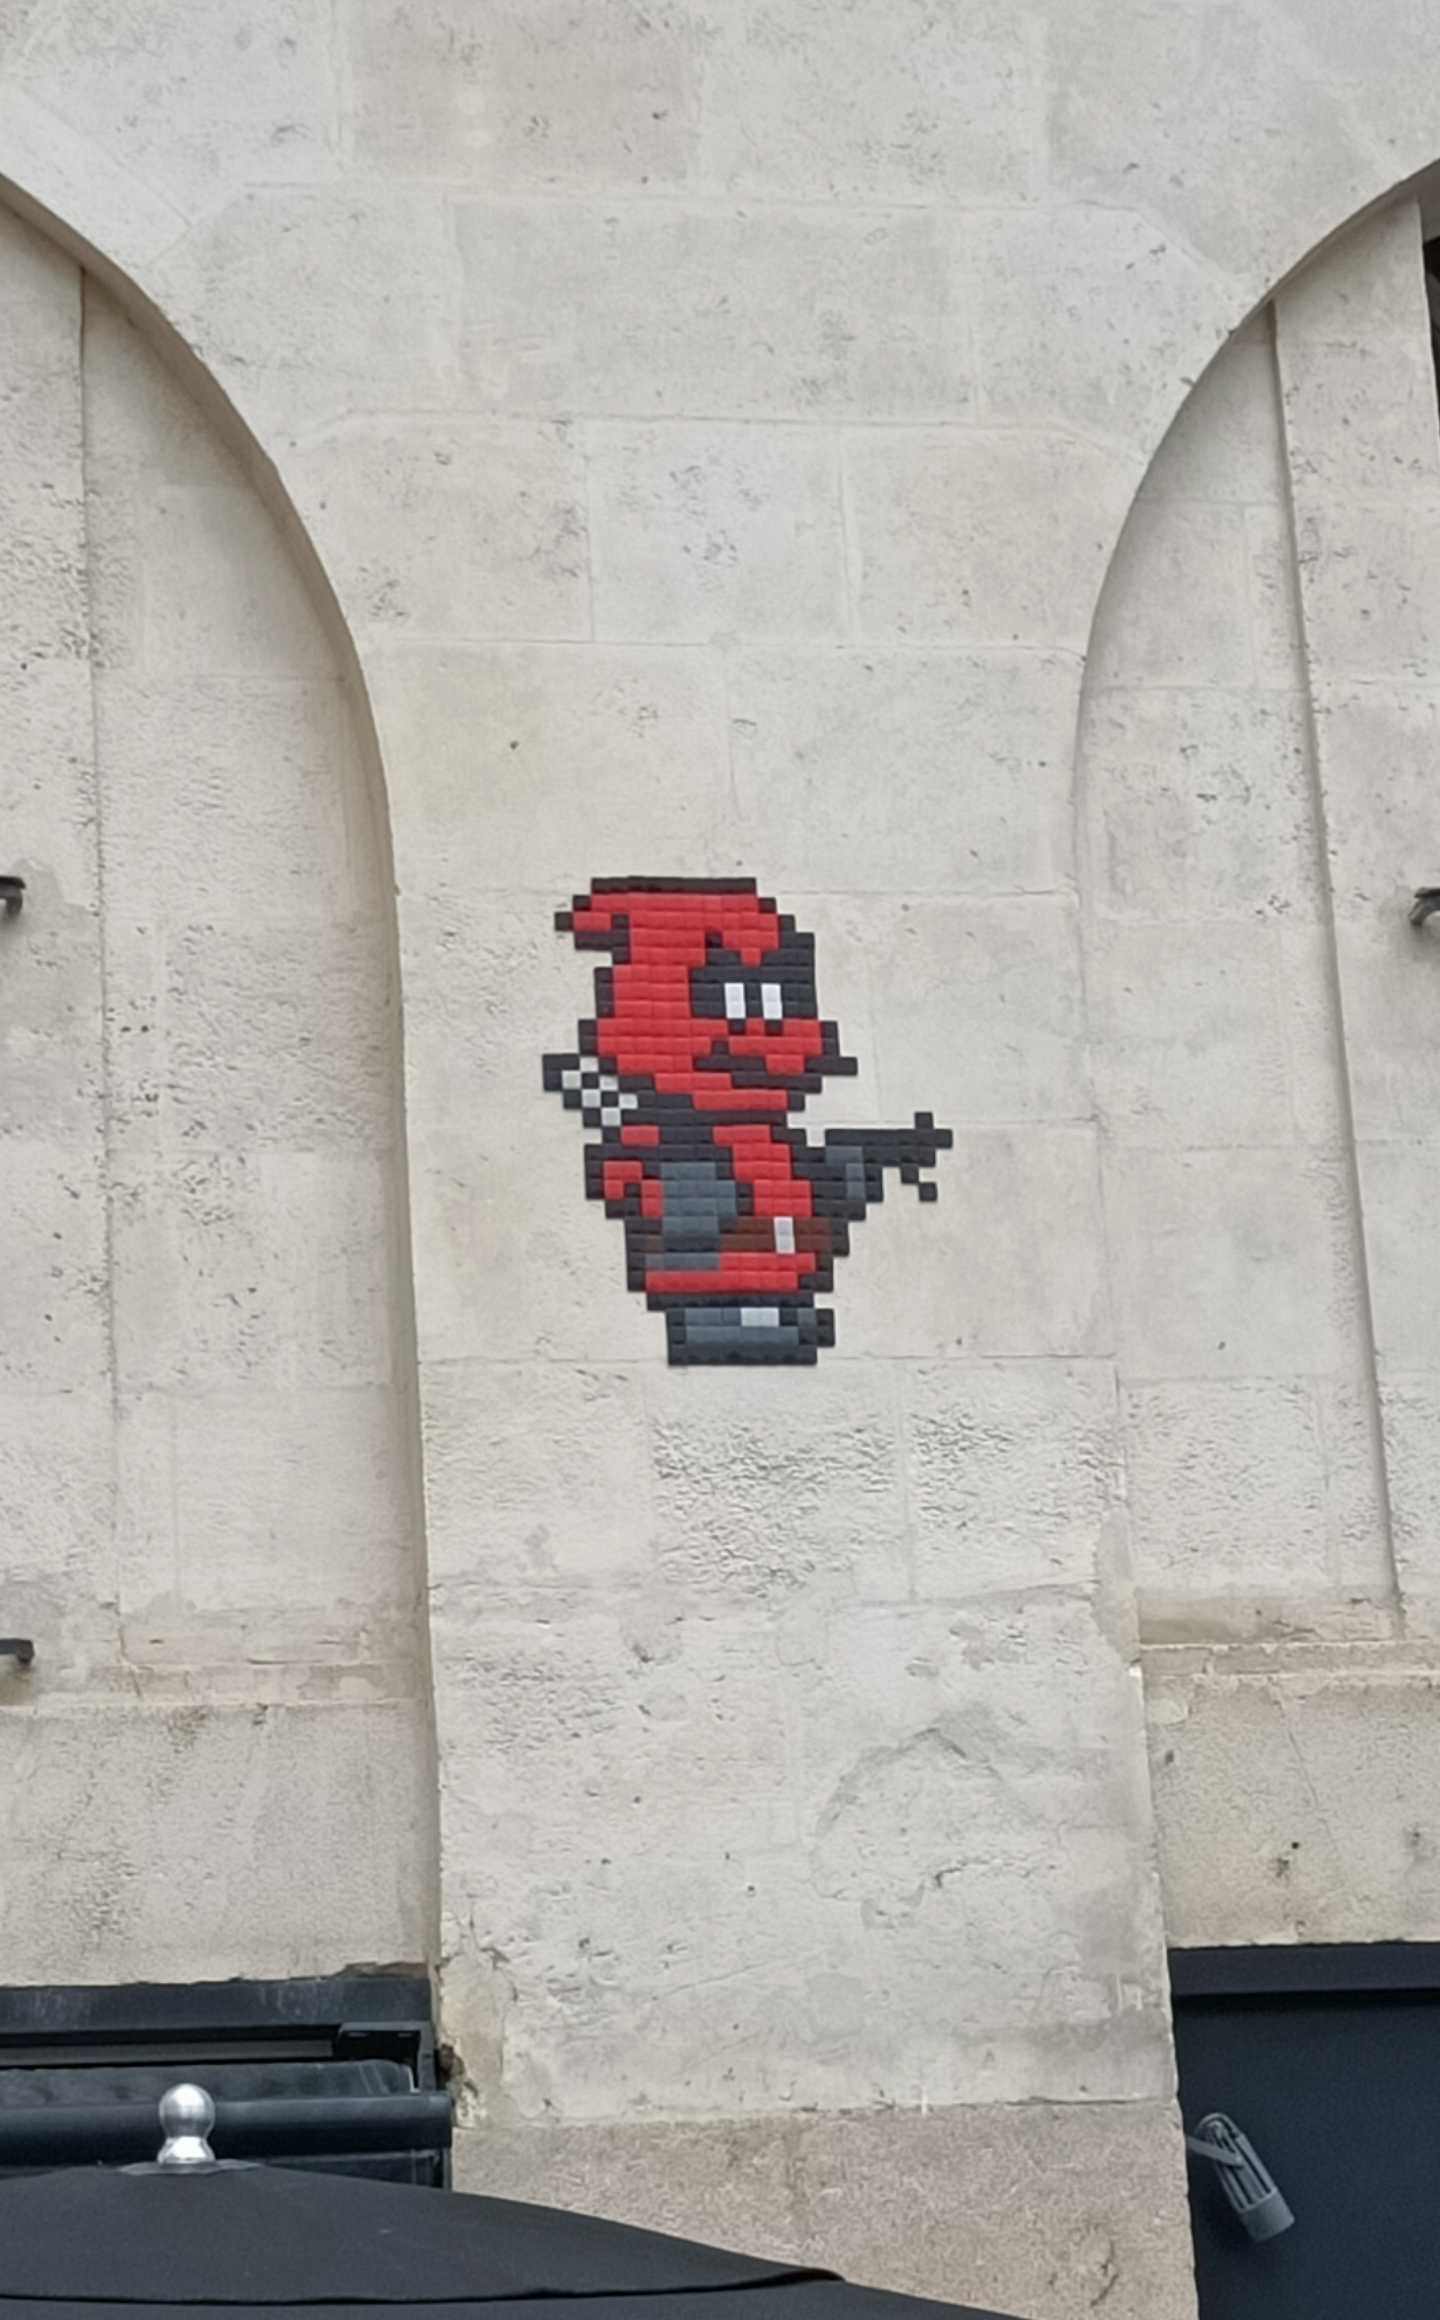 Mosaic 6431 Deadpool by the artist IN THE WOUP captured by Rabot in Nantes France